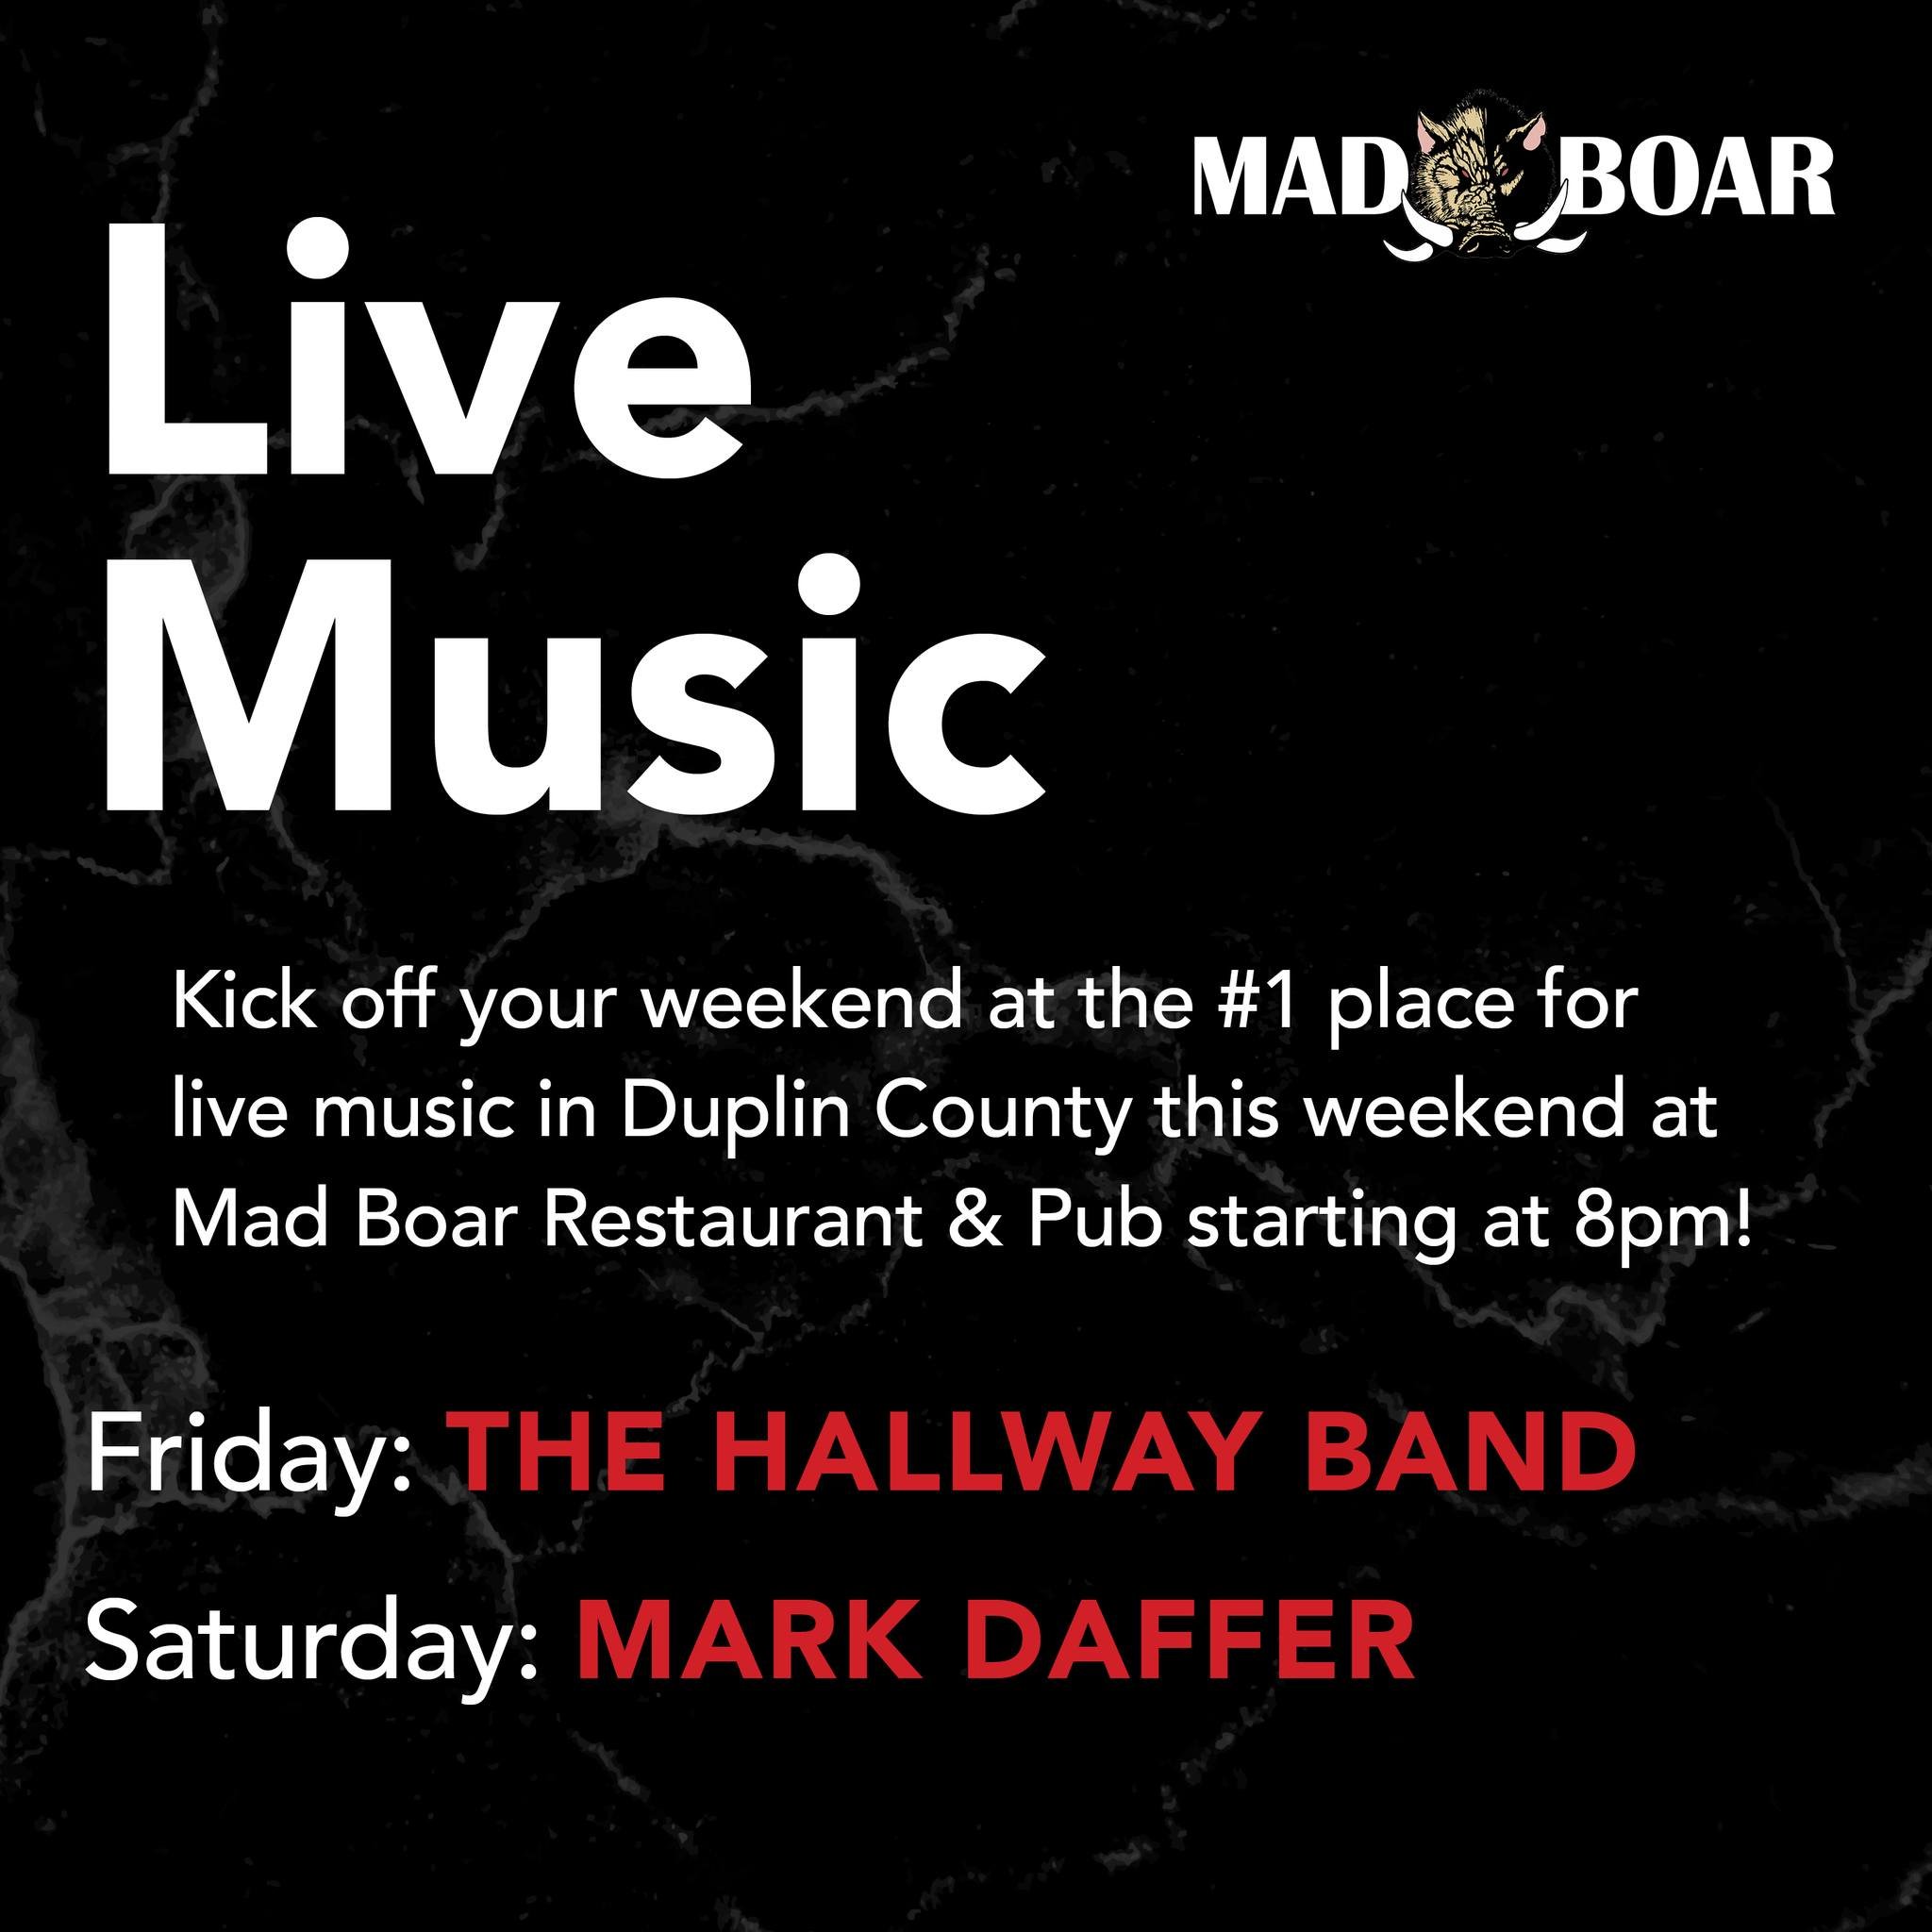 Ready to kick back and relax? Join us at Mad Boar for a weekend filled with fantastic food, refreshing drinks, and live entertainment by The Hallway Band and Mark Daffer. Let the good times roll!

#livemusic #supportlocalmusic #localband #madboarnc #